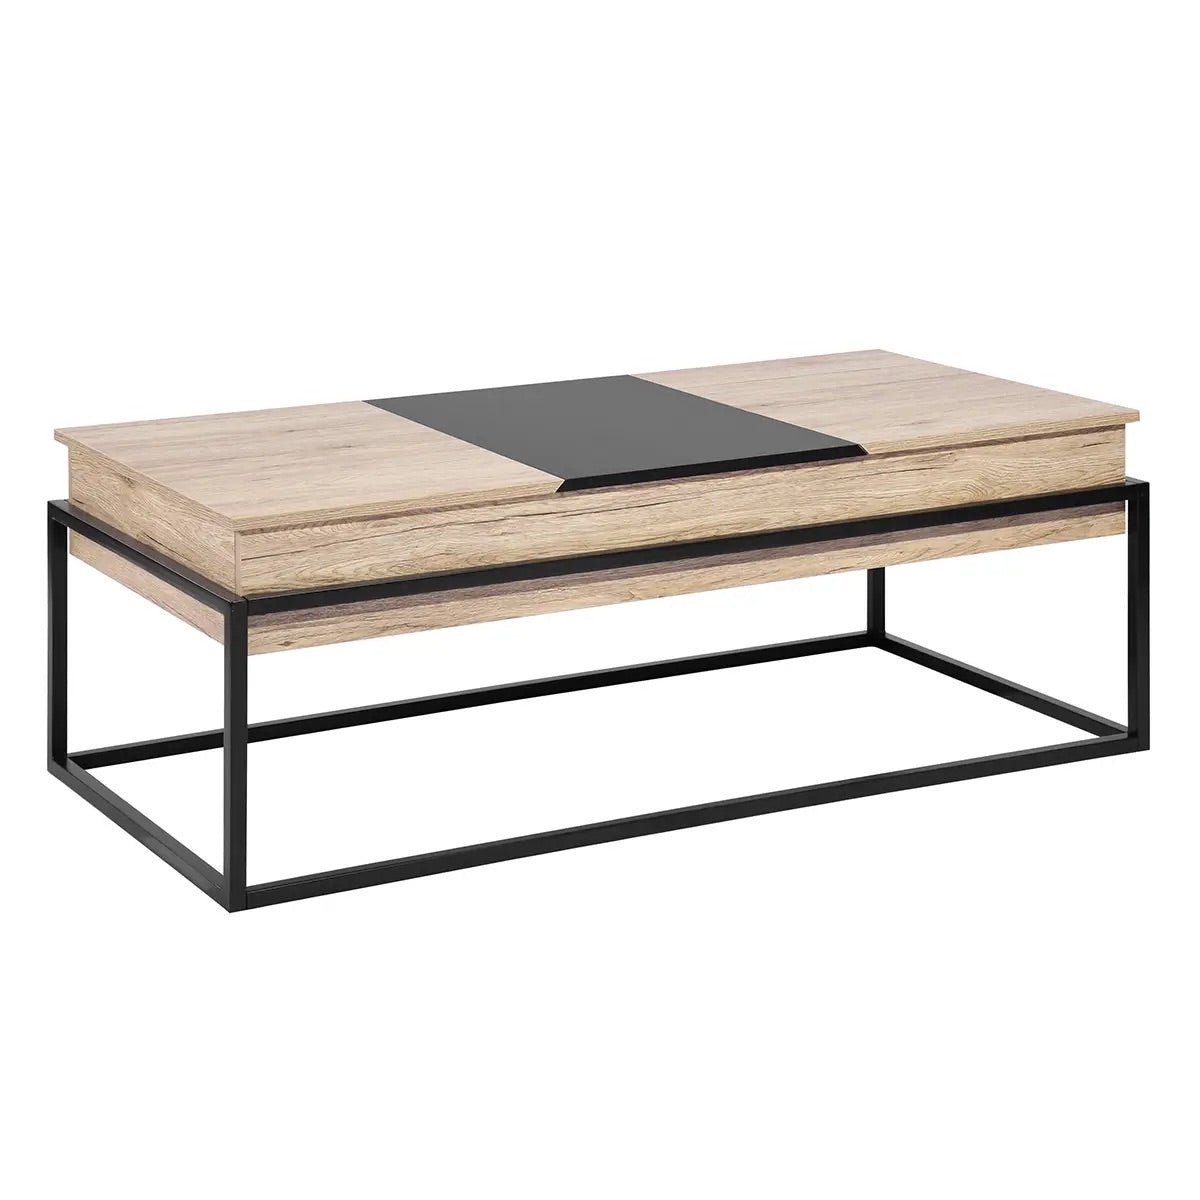 48'' Expandable Wooden Coffee Table with Storage - Oak Finish, Metal Base - Electronic laptop compartment - luxe designer